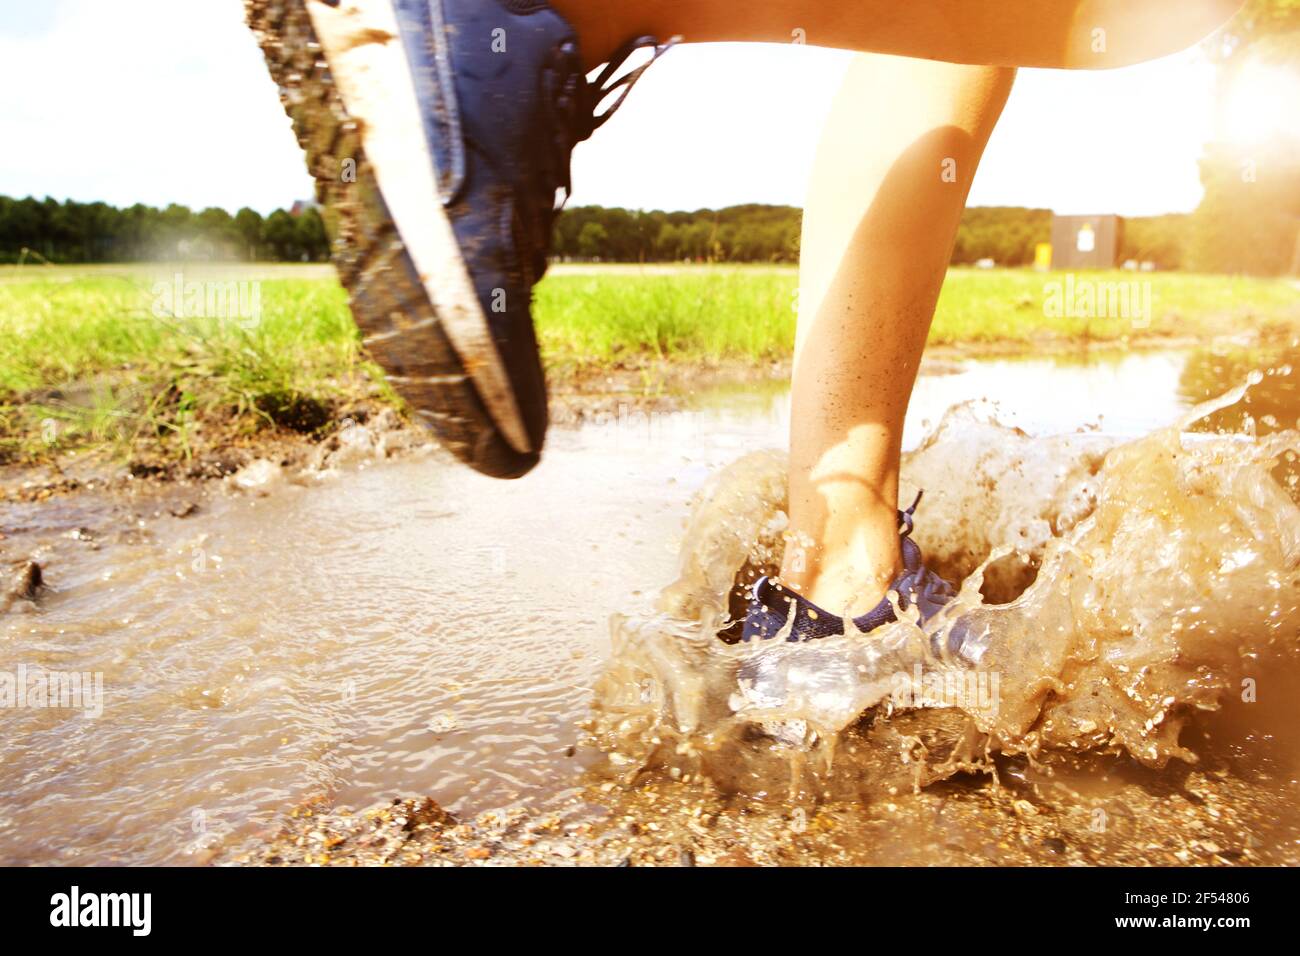 Close up portrait of runner's sneakers splashing in mud puddle Stock Photo